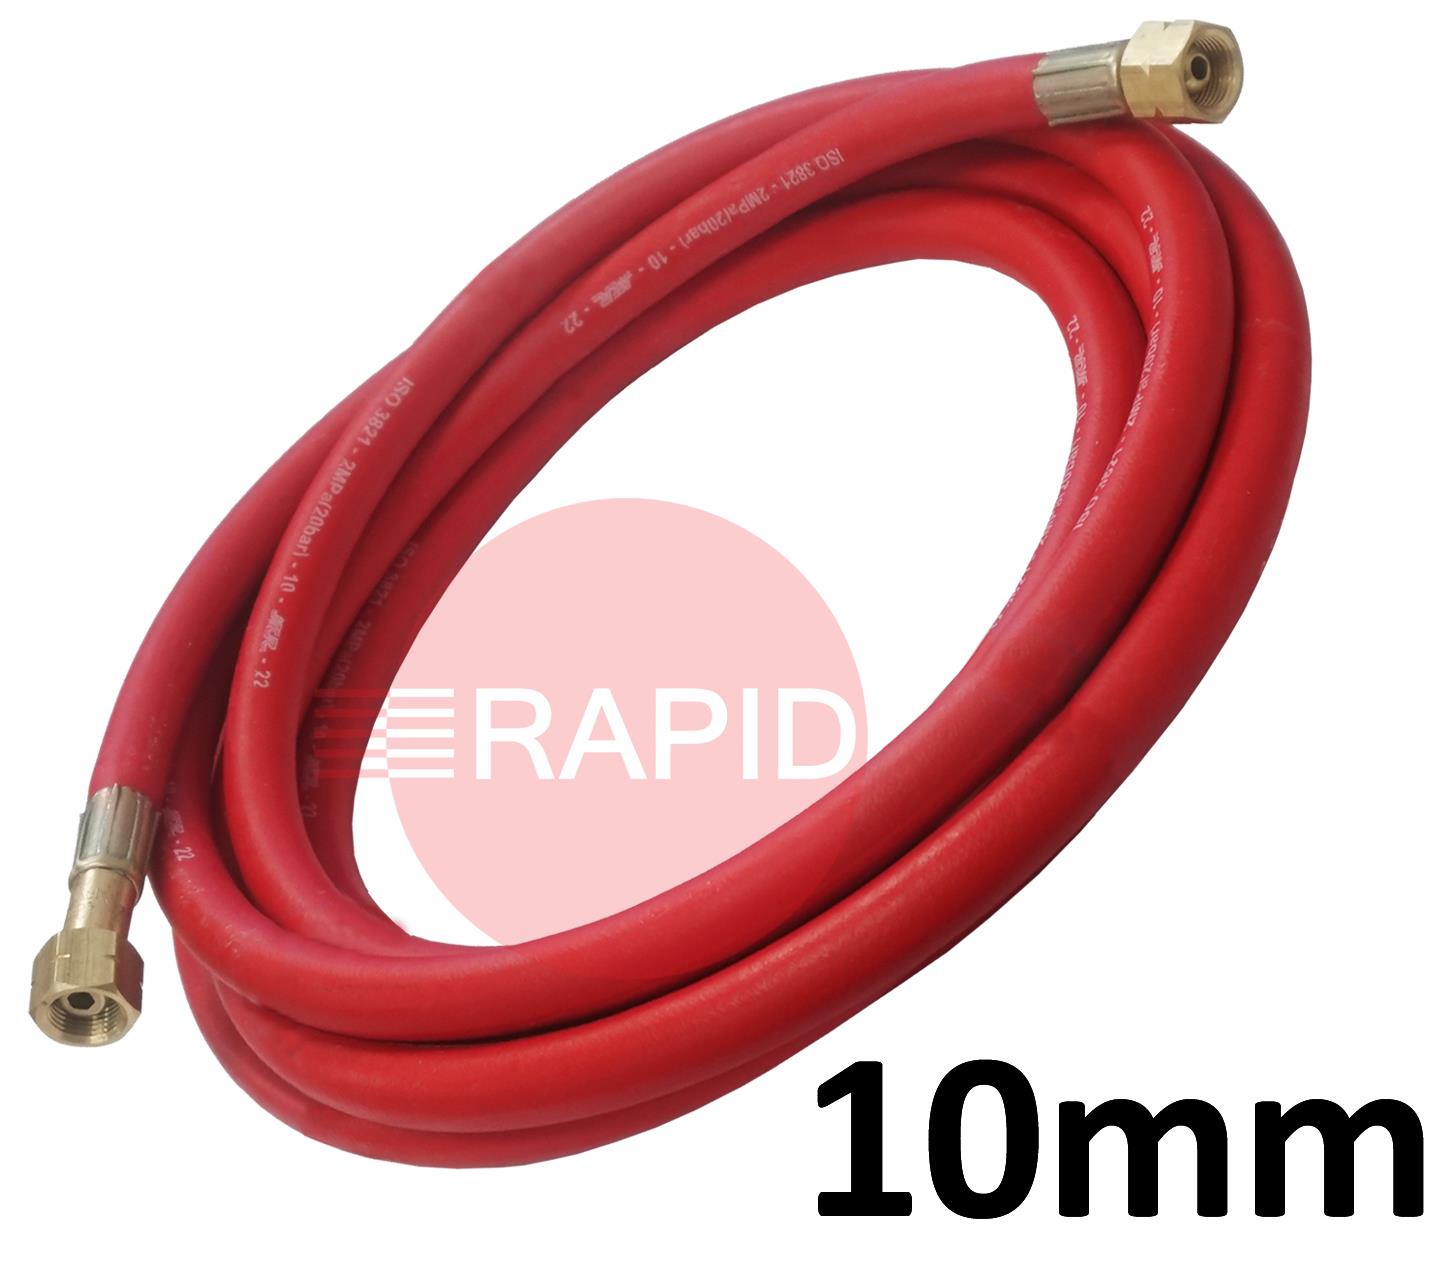 A5131  Fitted Acetylene Hose. 10mm Bore. G3/8 Check Valve & G3/8 Regulator Connection - 20m